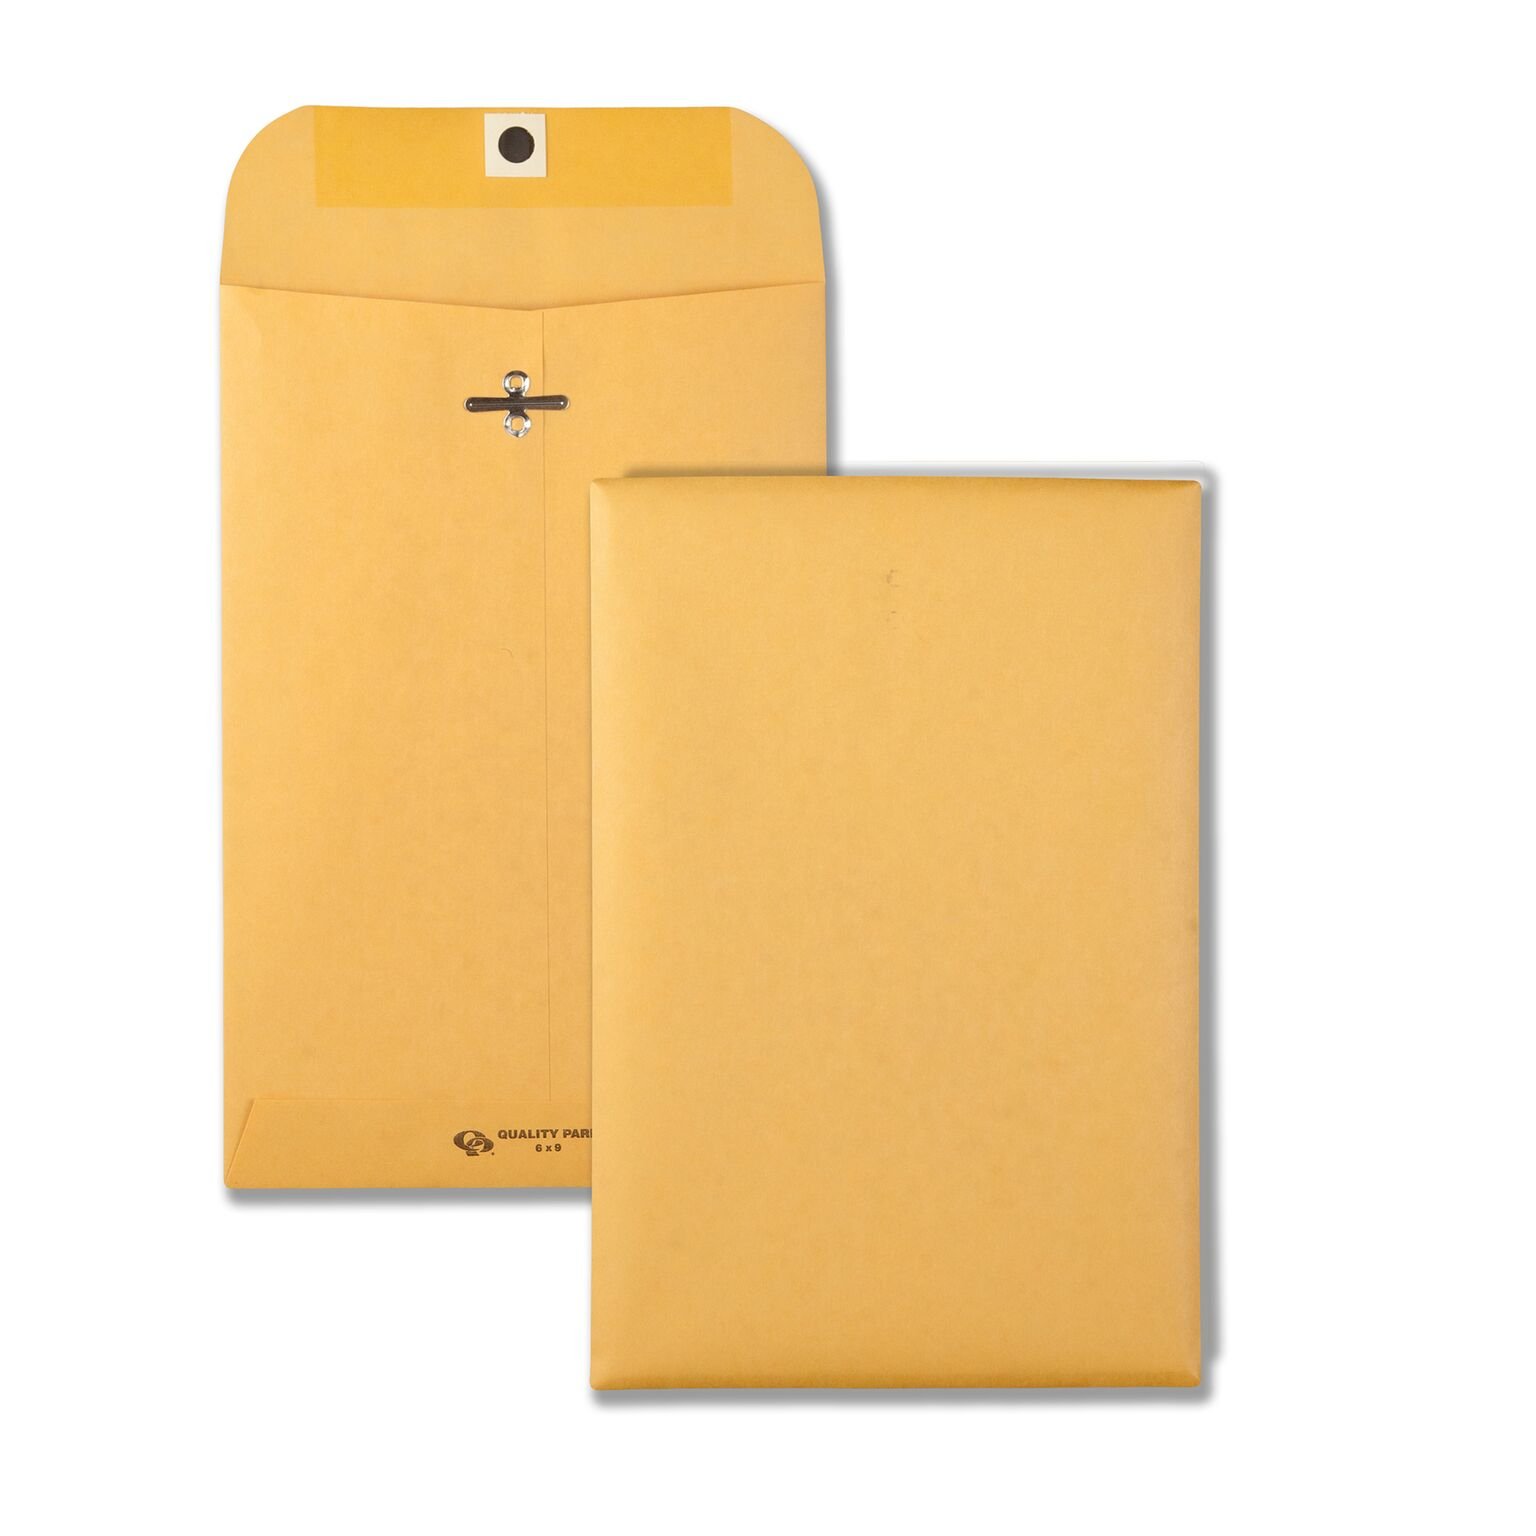 Book Cover Quality Park 6 x 9 Clasp Envelopes, Clasp and Gummed Closures for Storing or Mailing, 28 lb Kraft Paper, 100 per Box (QUA37855) 6 x 9 Inches Standard Packaging